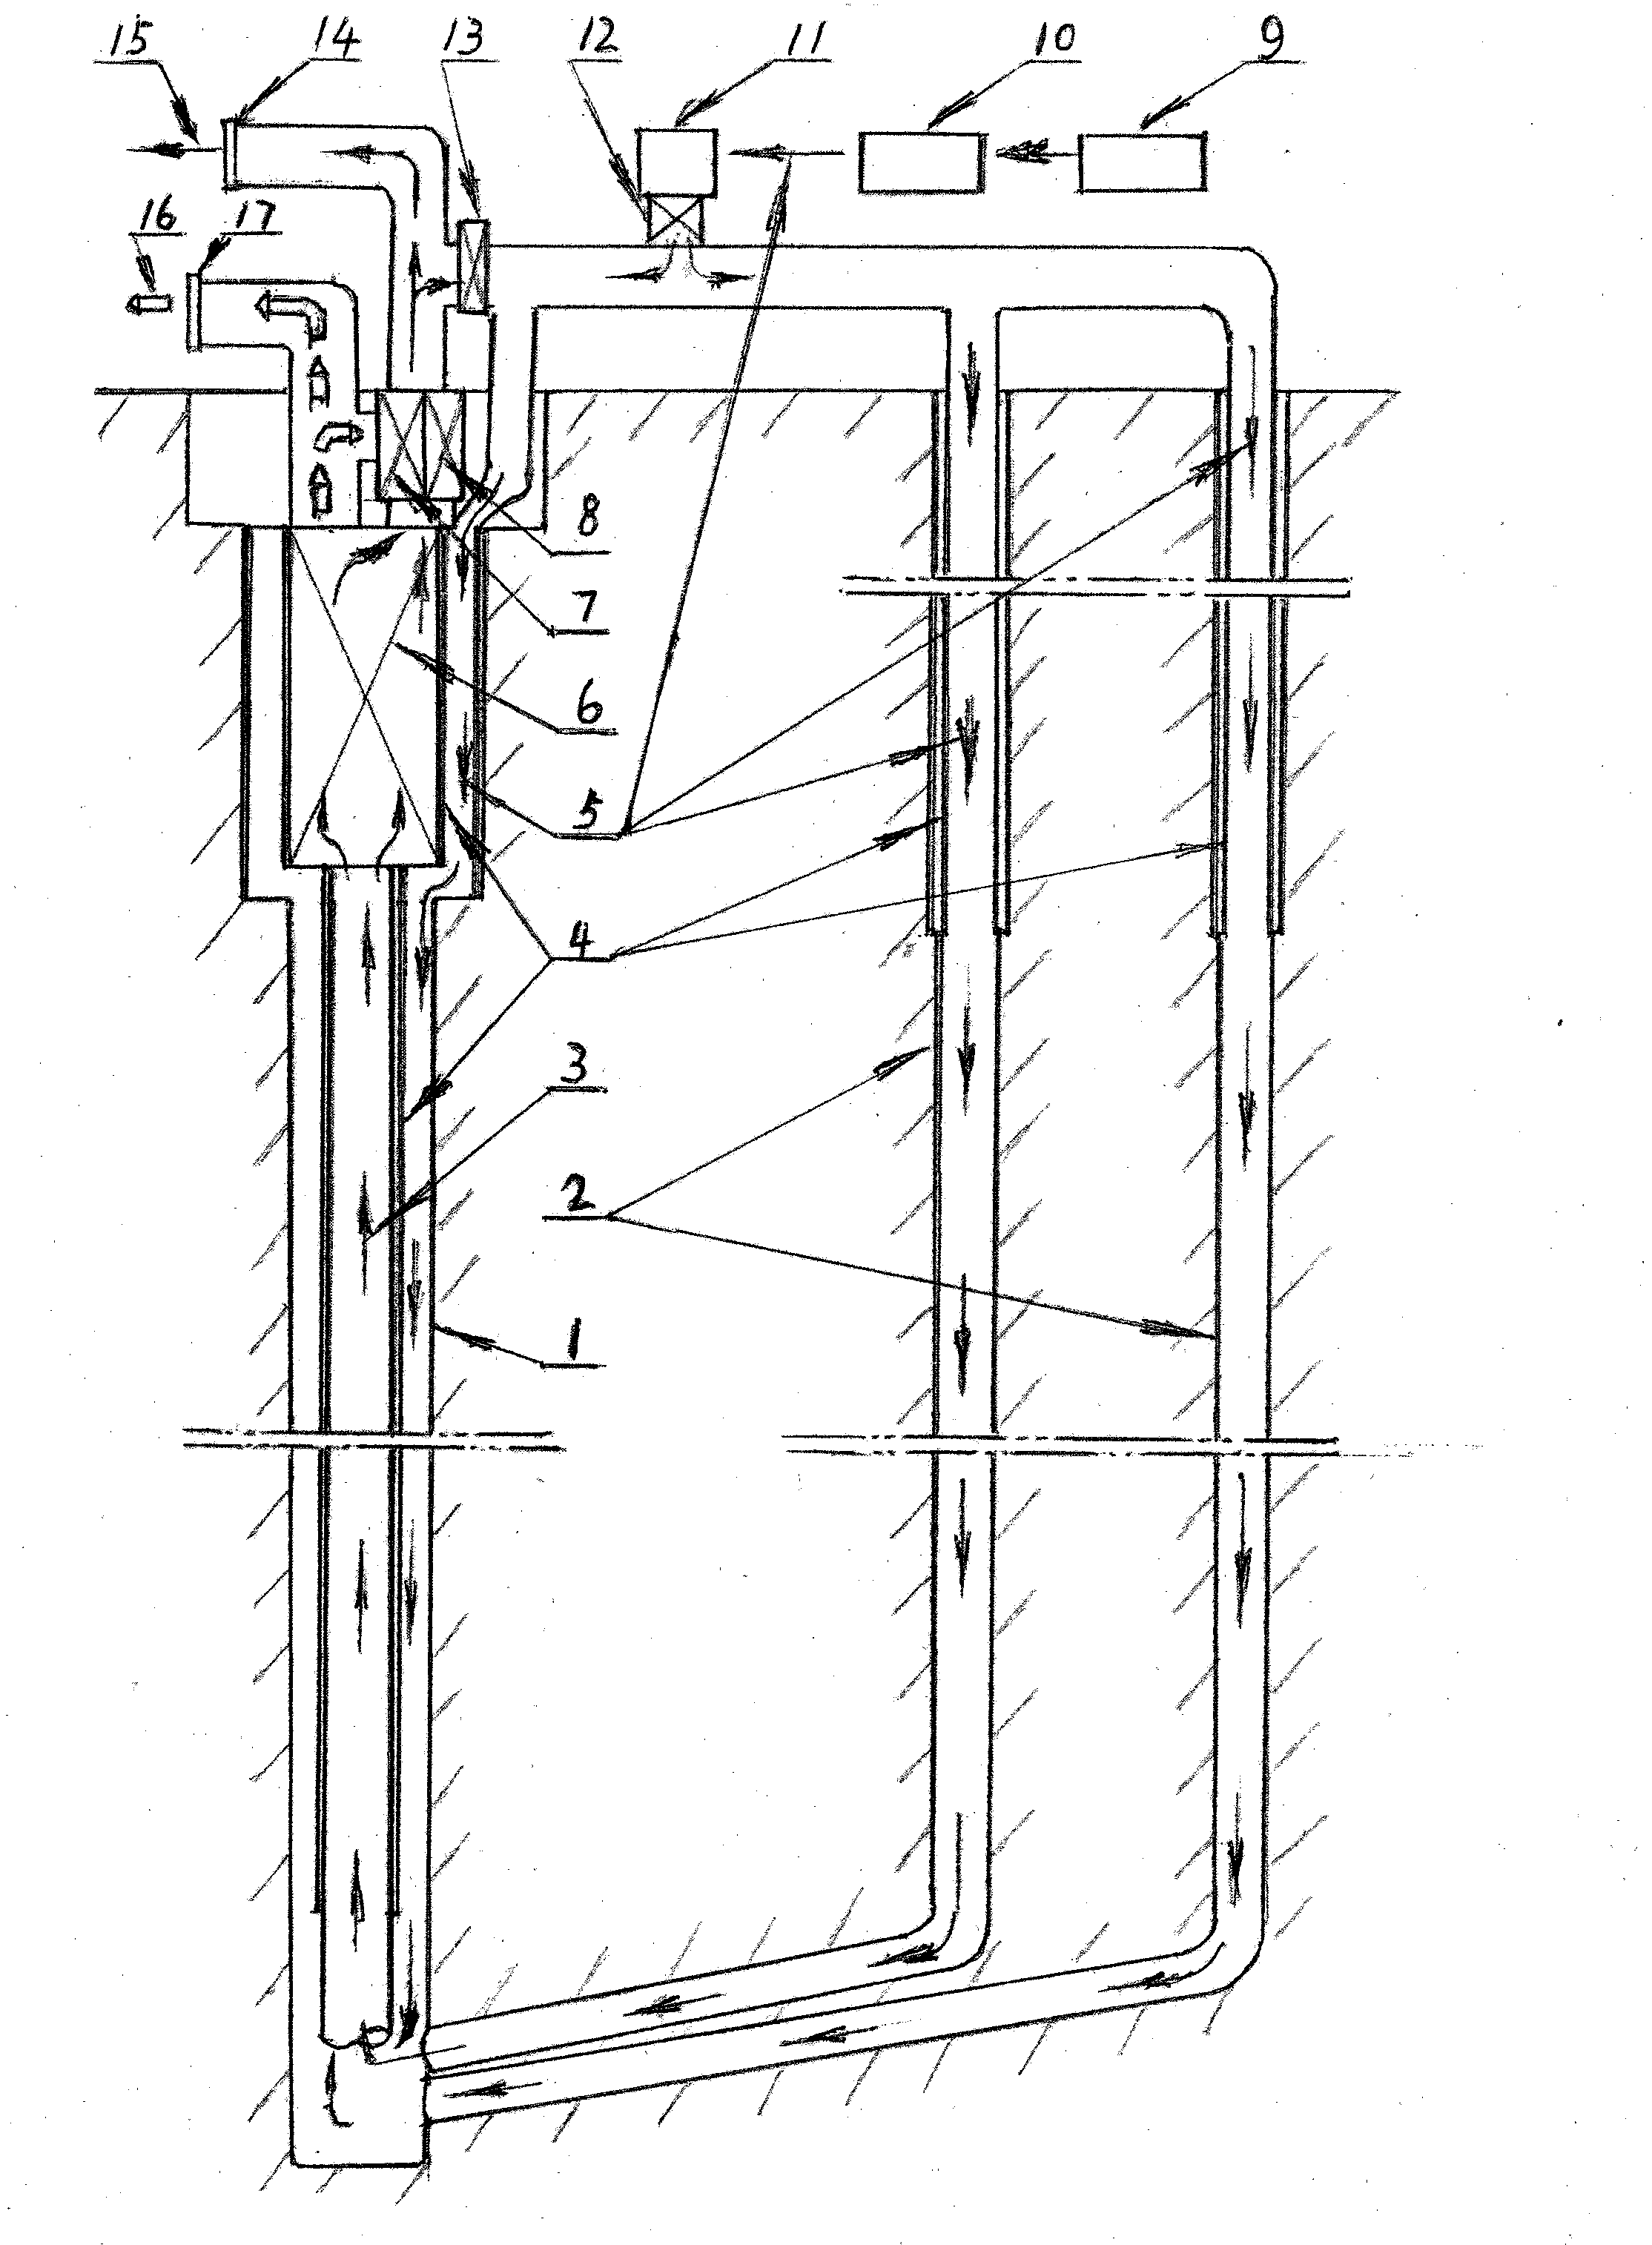 Multi-well communication and circulating heating type deep subterranean heat extraction device